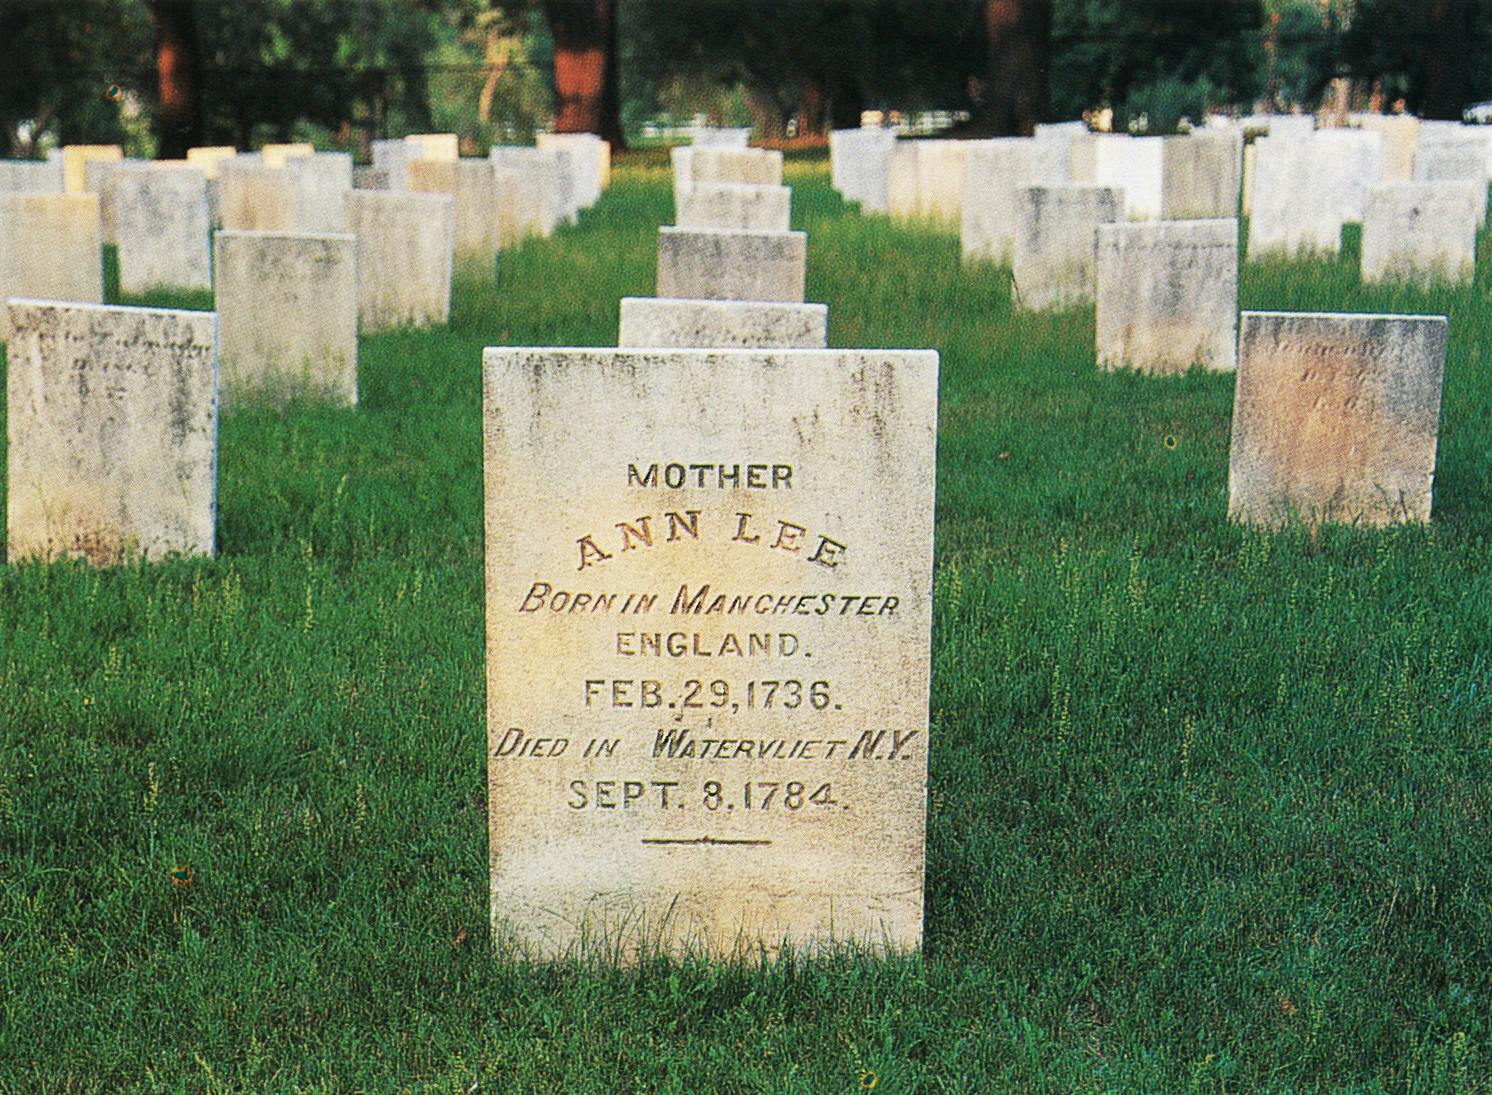 The gravestone of Mother Ann Lee in the Shaker cemetery in Watervliet, New York, where her remains were moved after she was exhumed 1835. Her grave is the same as that of every other Shaker in the cemetery, apart from being a couple inches larger